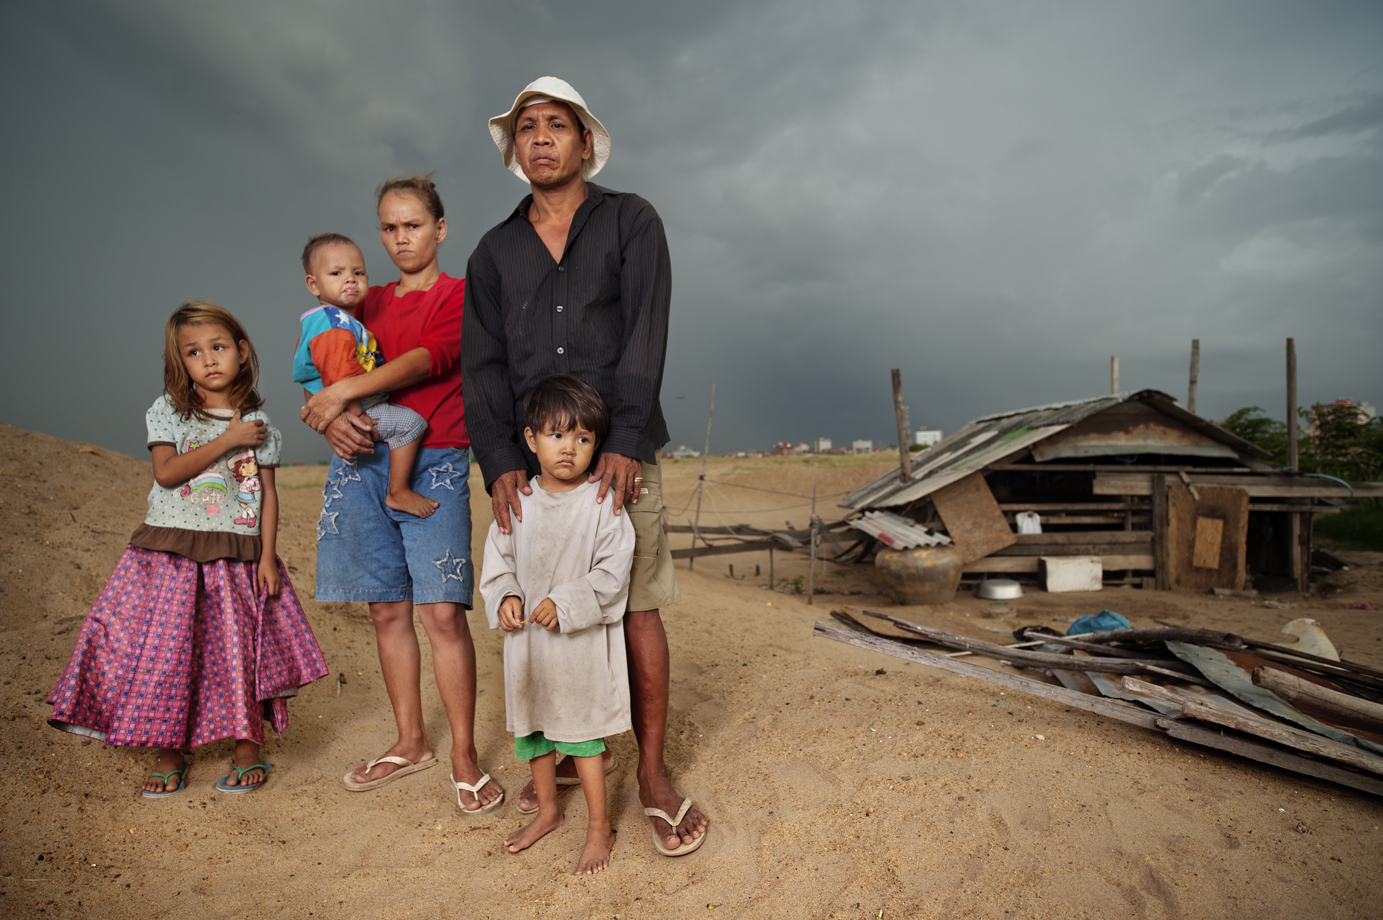  A family stands in front of their house, which is the only house left from an entire community. The family opposes the government's demands for forced relocation ( land grabbing ), Boeung Kak lake, Phnom Penh / Cambodia 